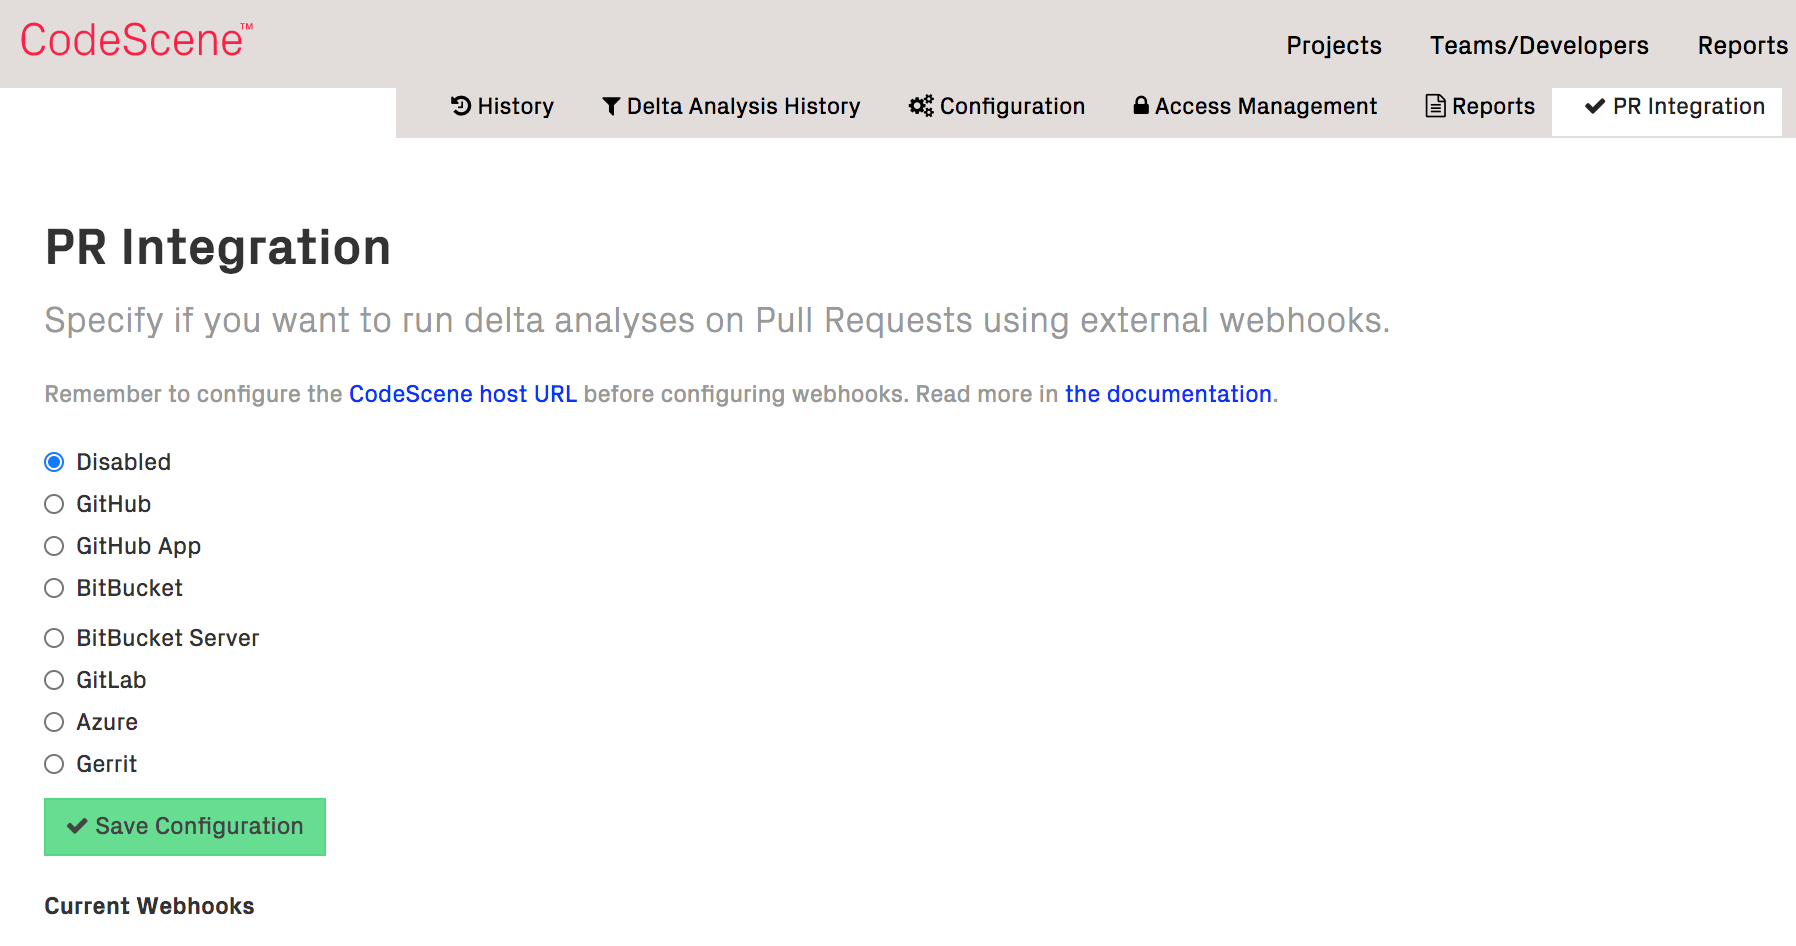 Enable the automated pull request integration to use CodeScene as review input and quality gate.